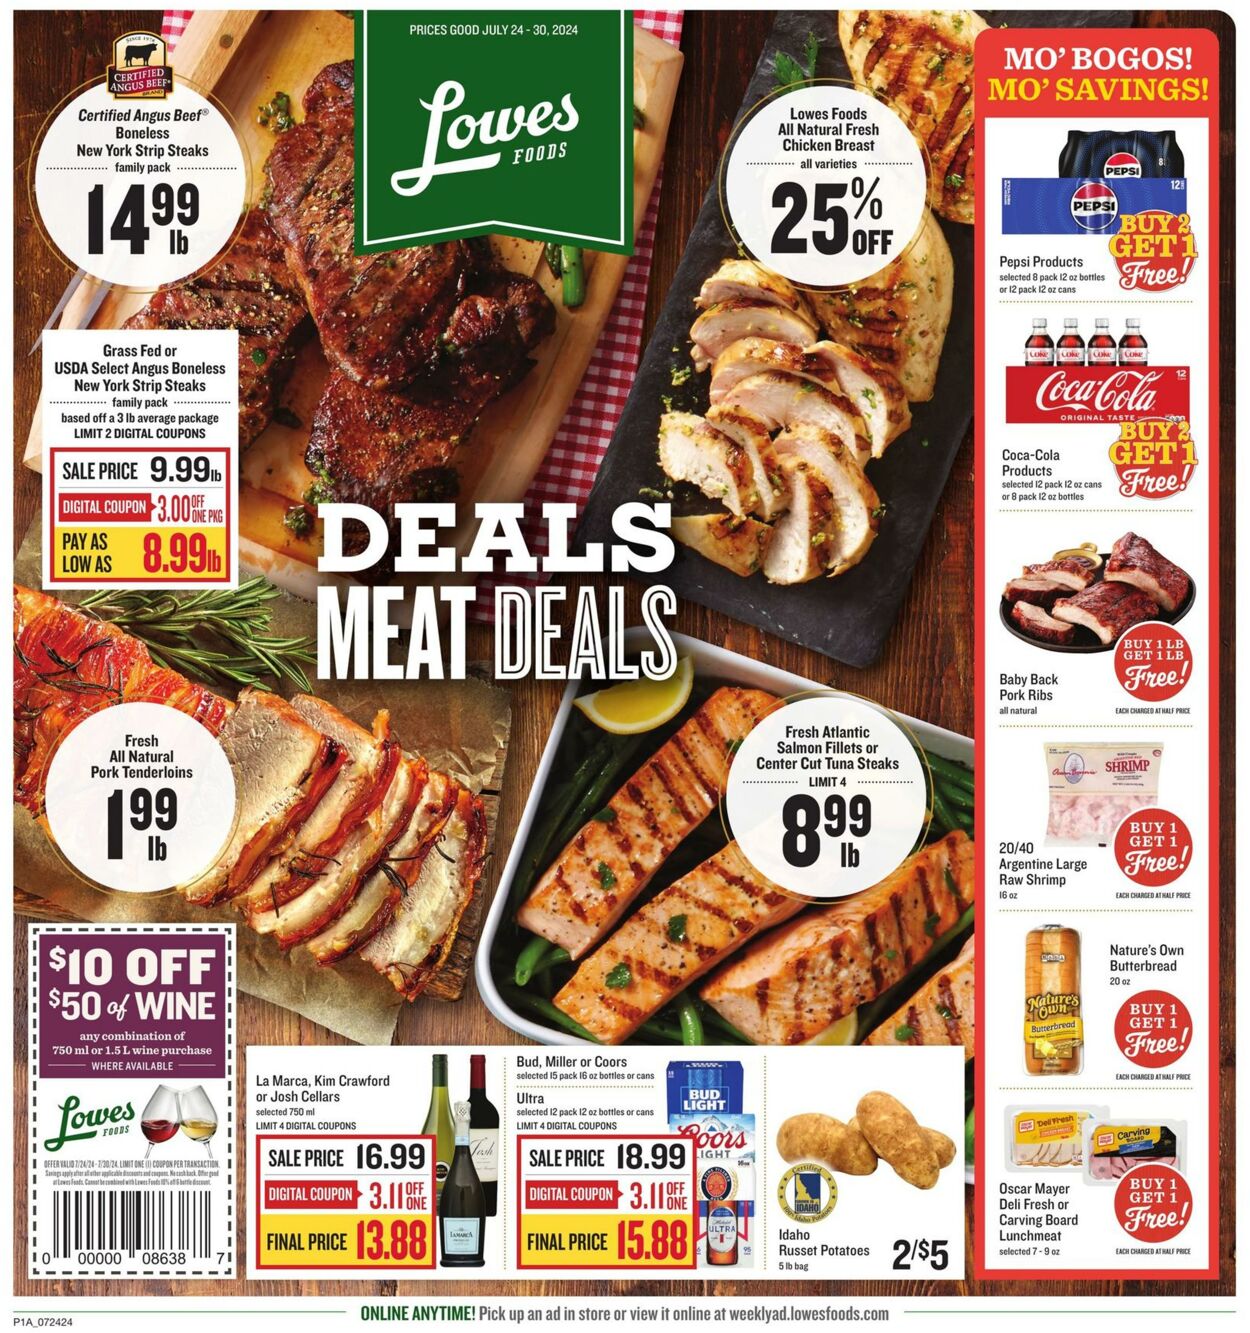 Lowes Foods Promotional weekly ads